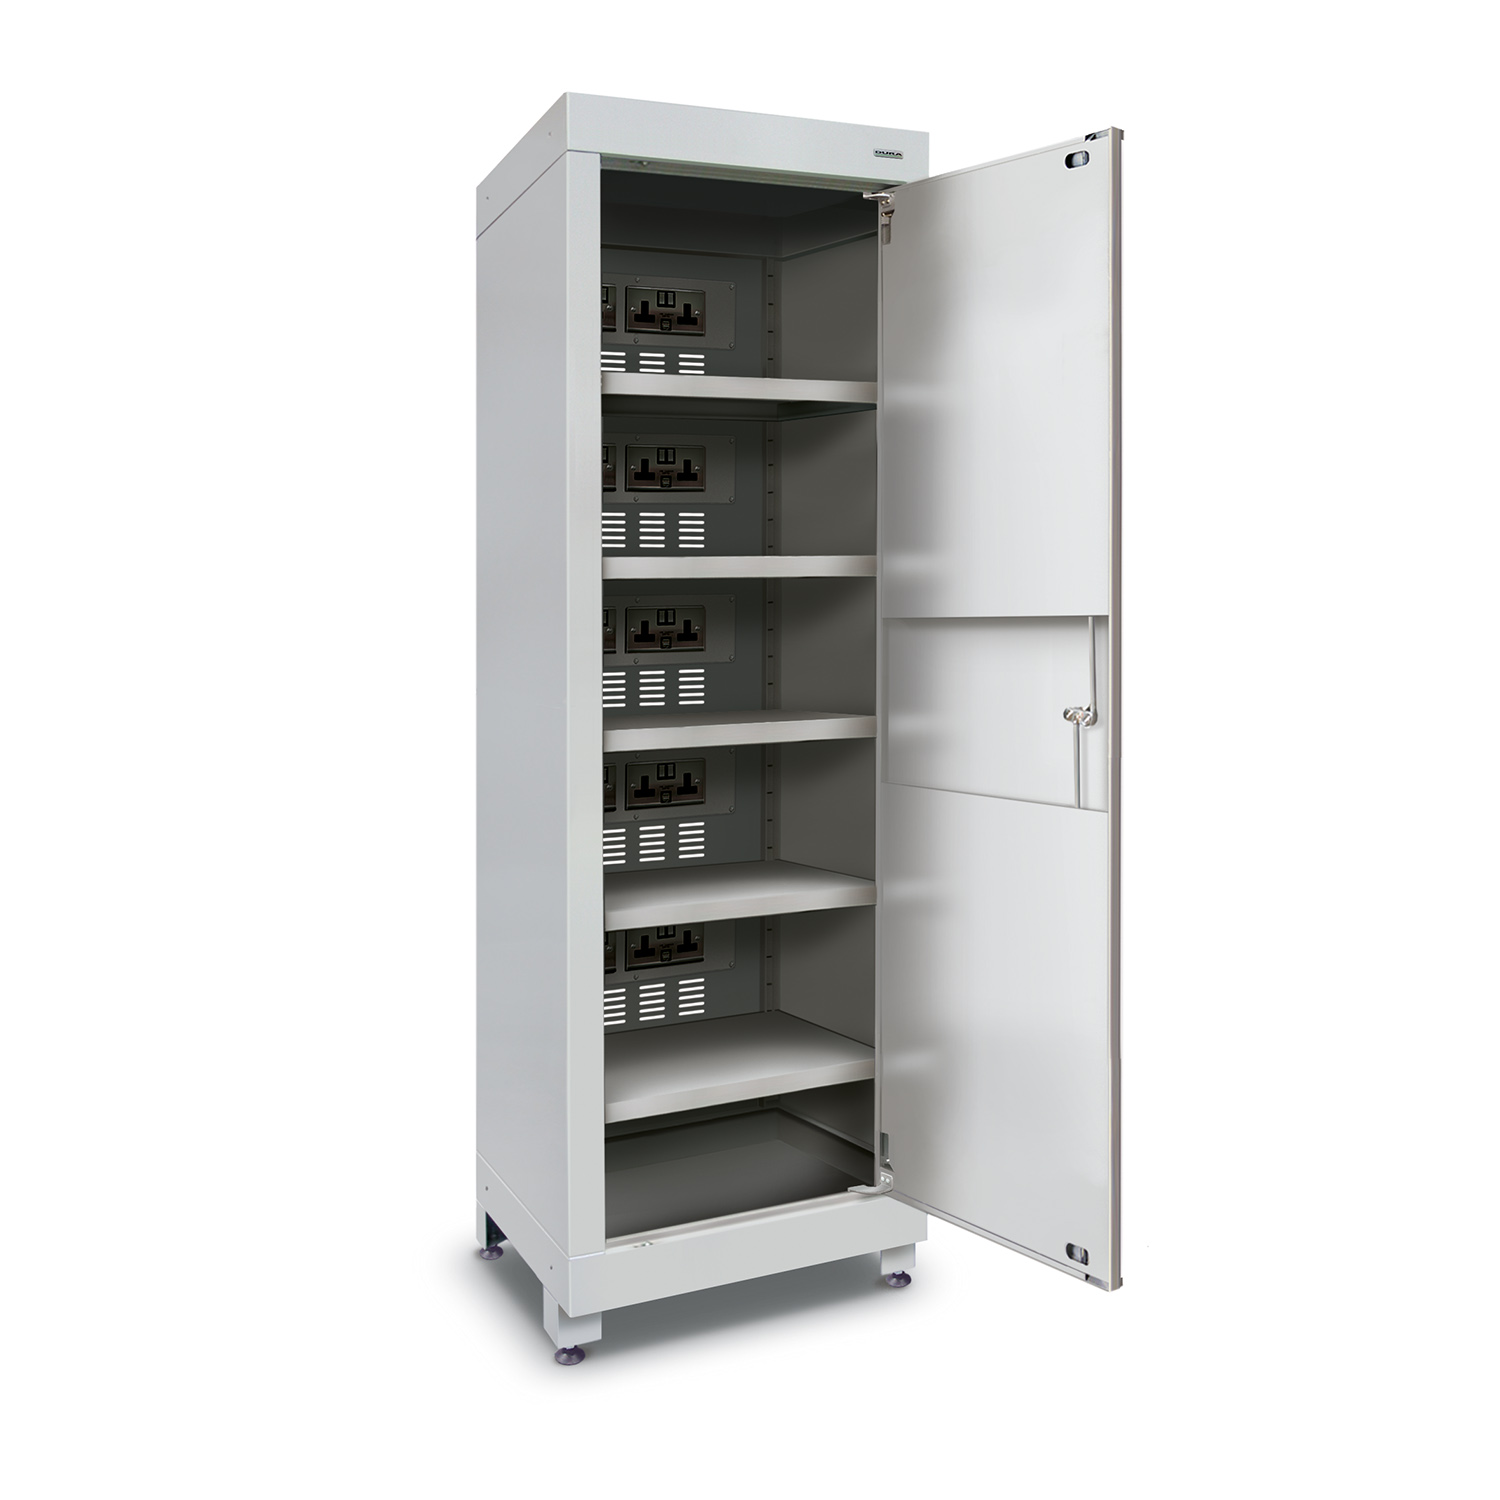 Tall base cabinet for electrical charging